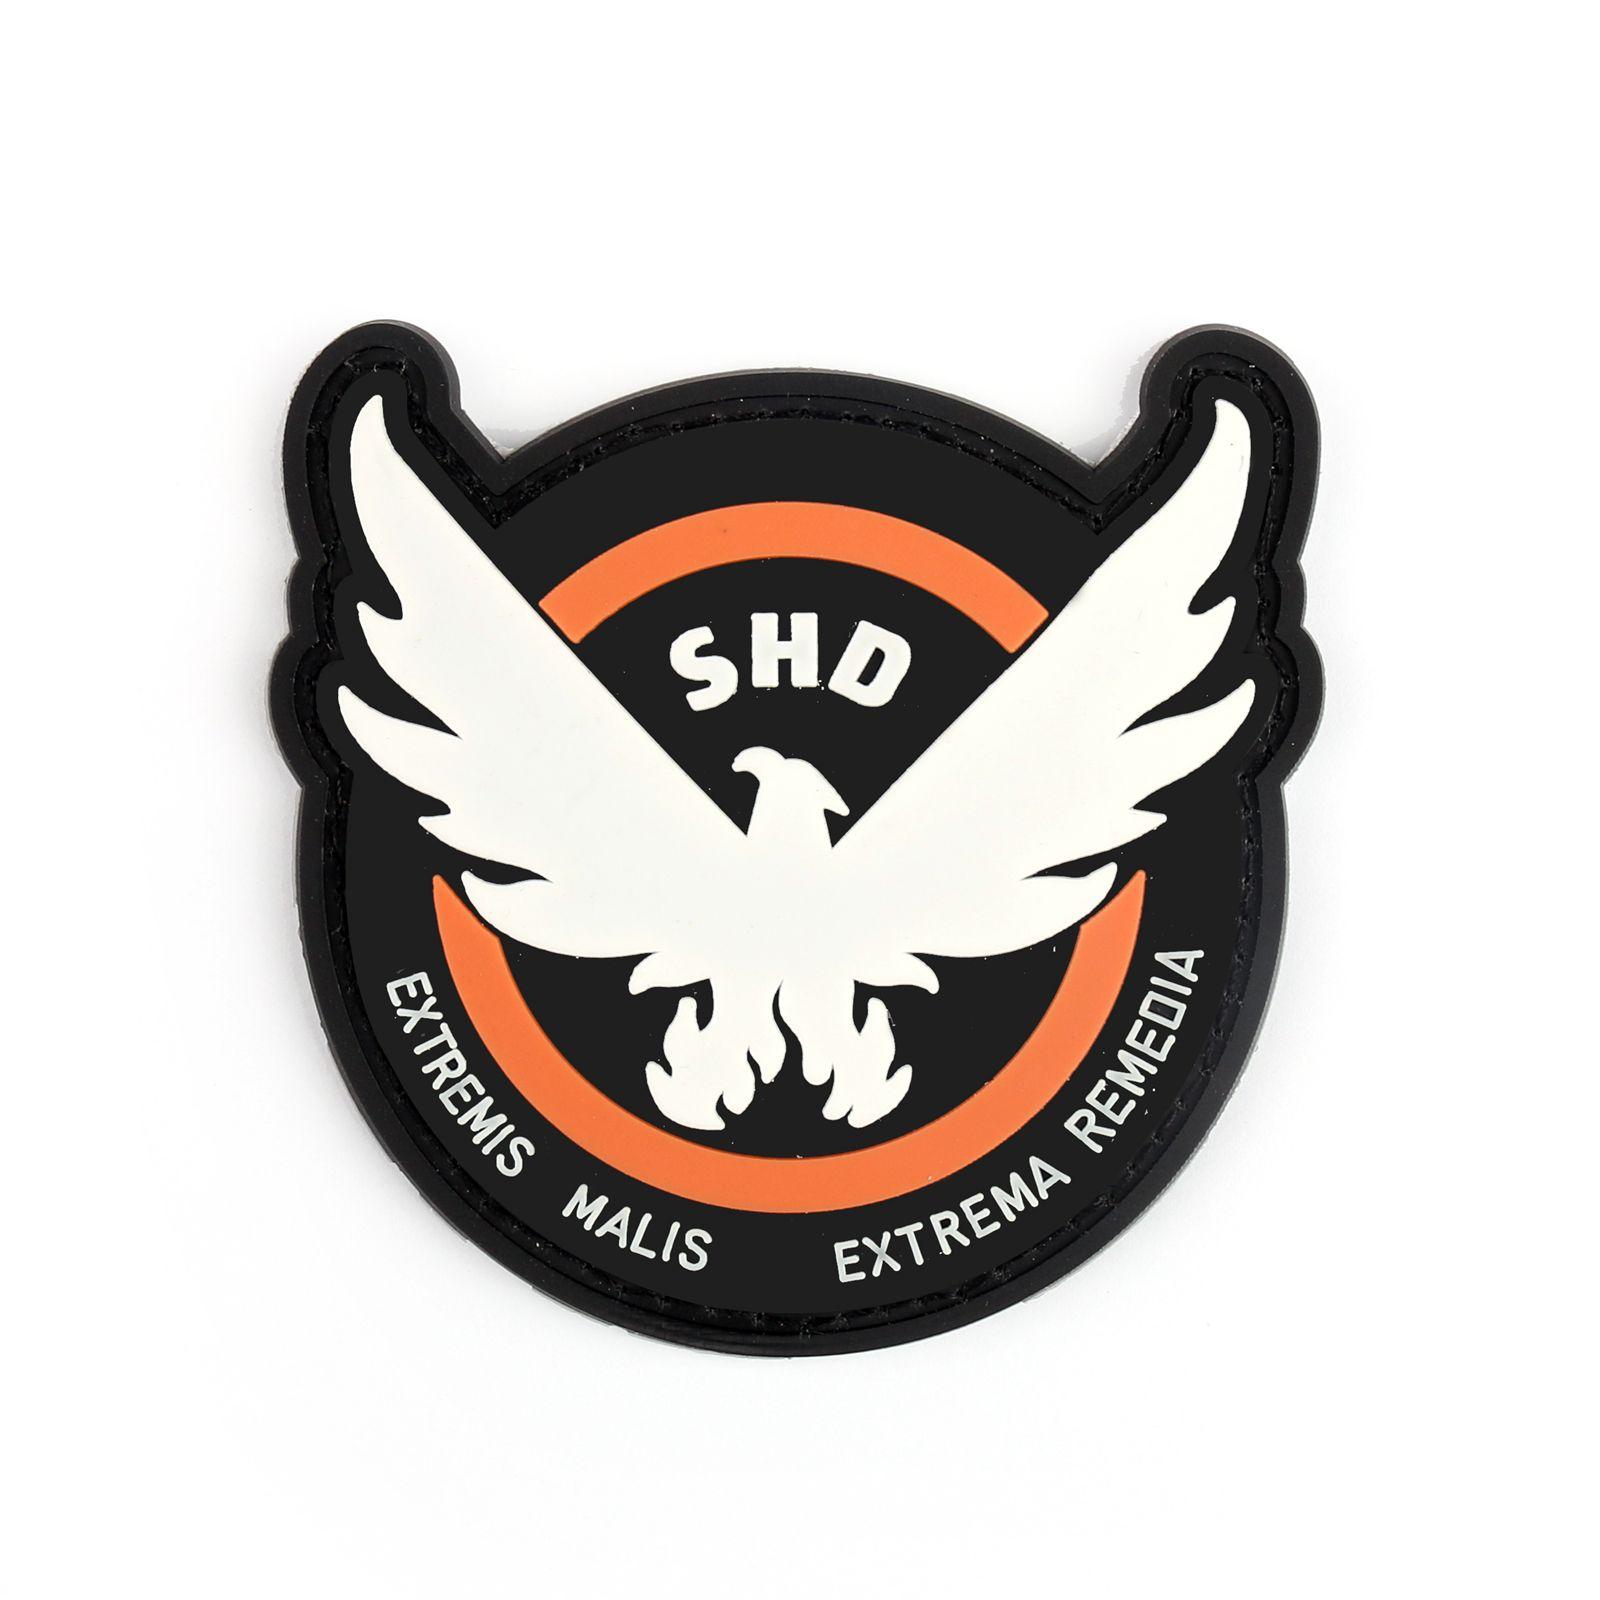 The Division Logo - 9CM Tom Clancy's The Division Agent SHD logo Hook Loop patch badge ...